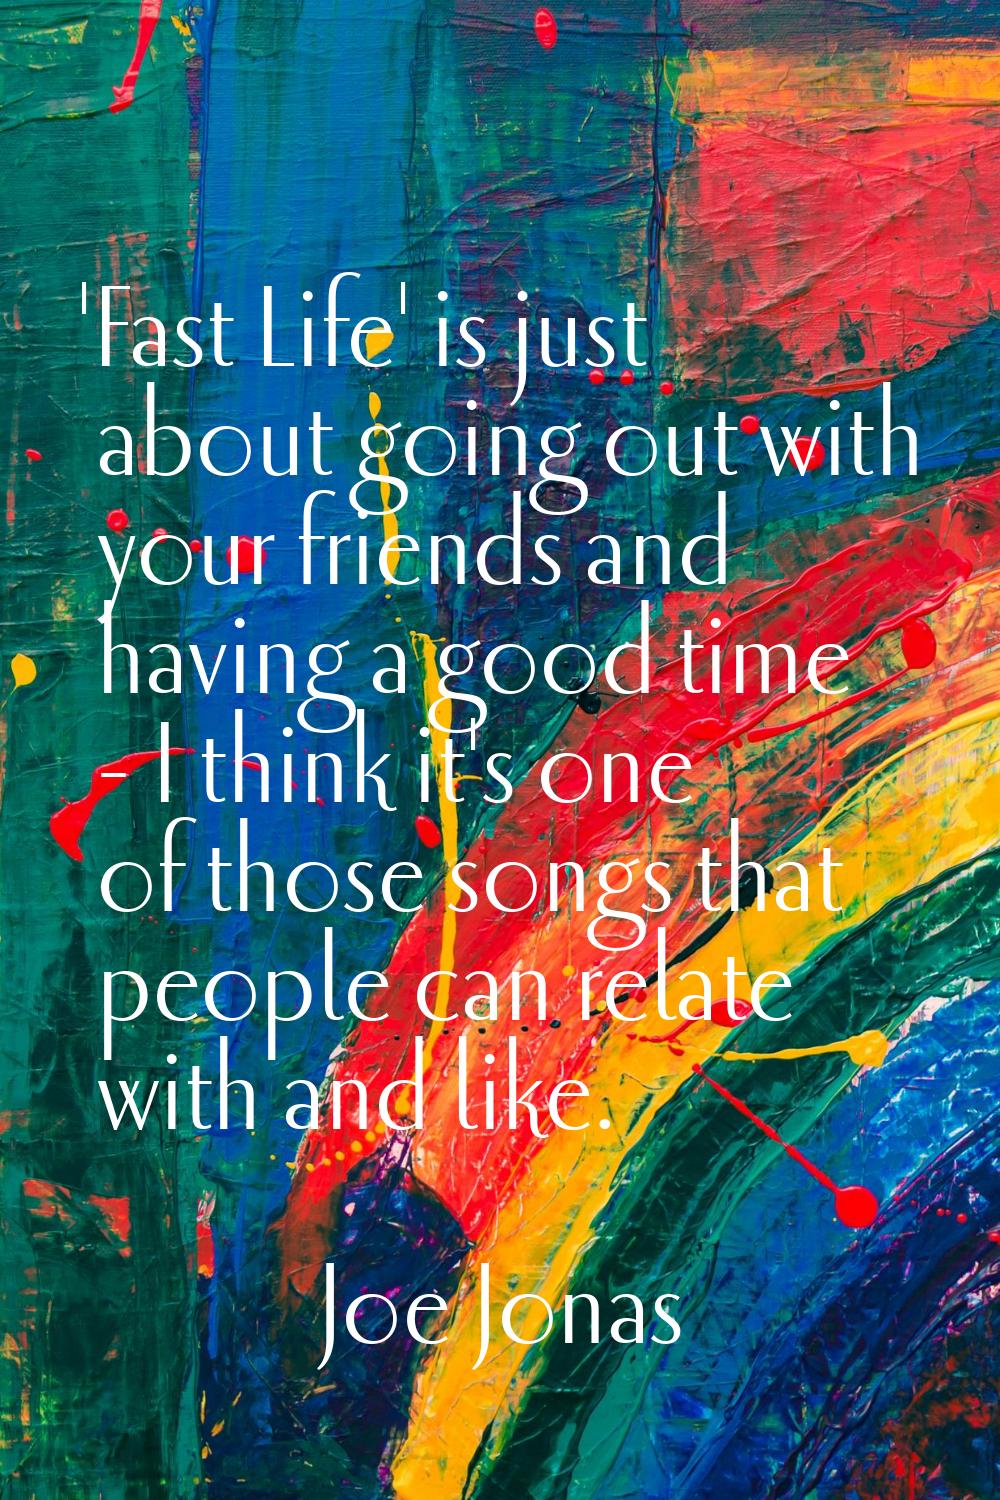 'Fast Life' is just about going out with your friends and having a good time - I think it's one of 